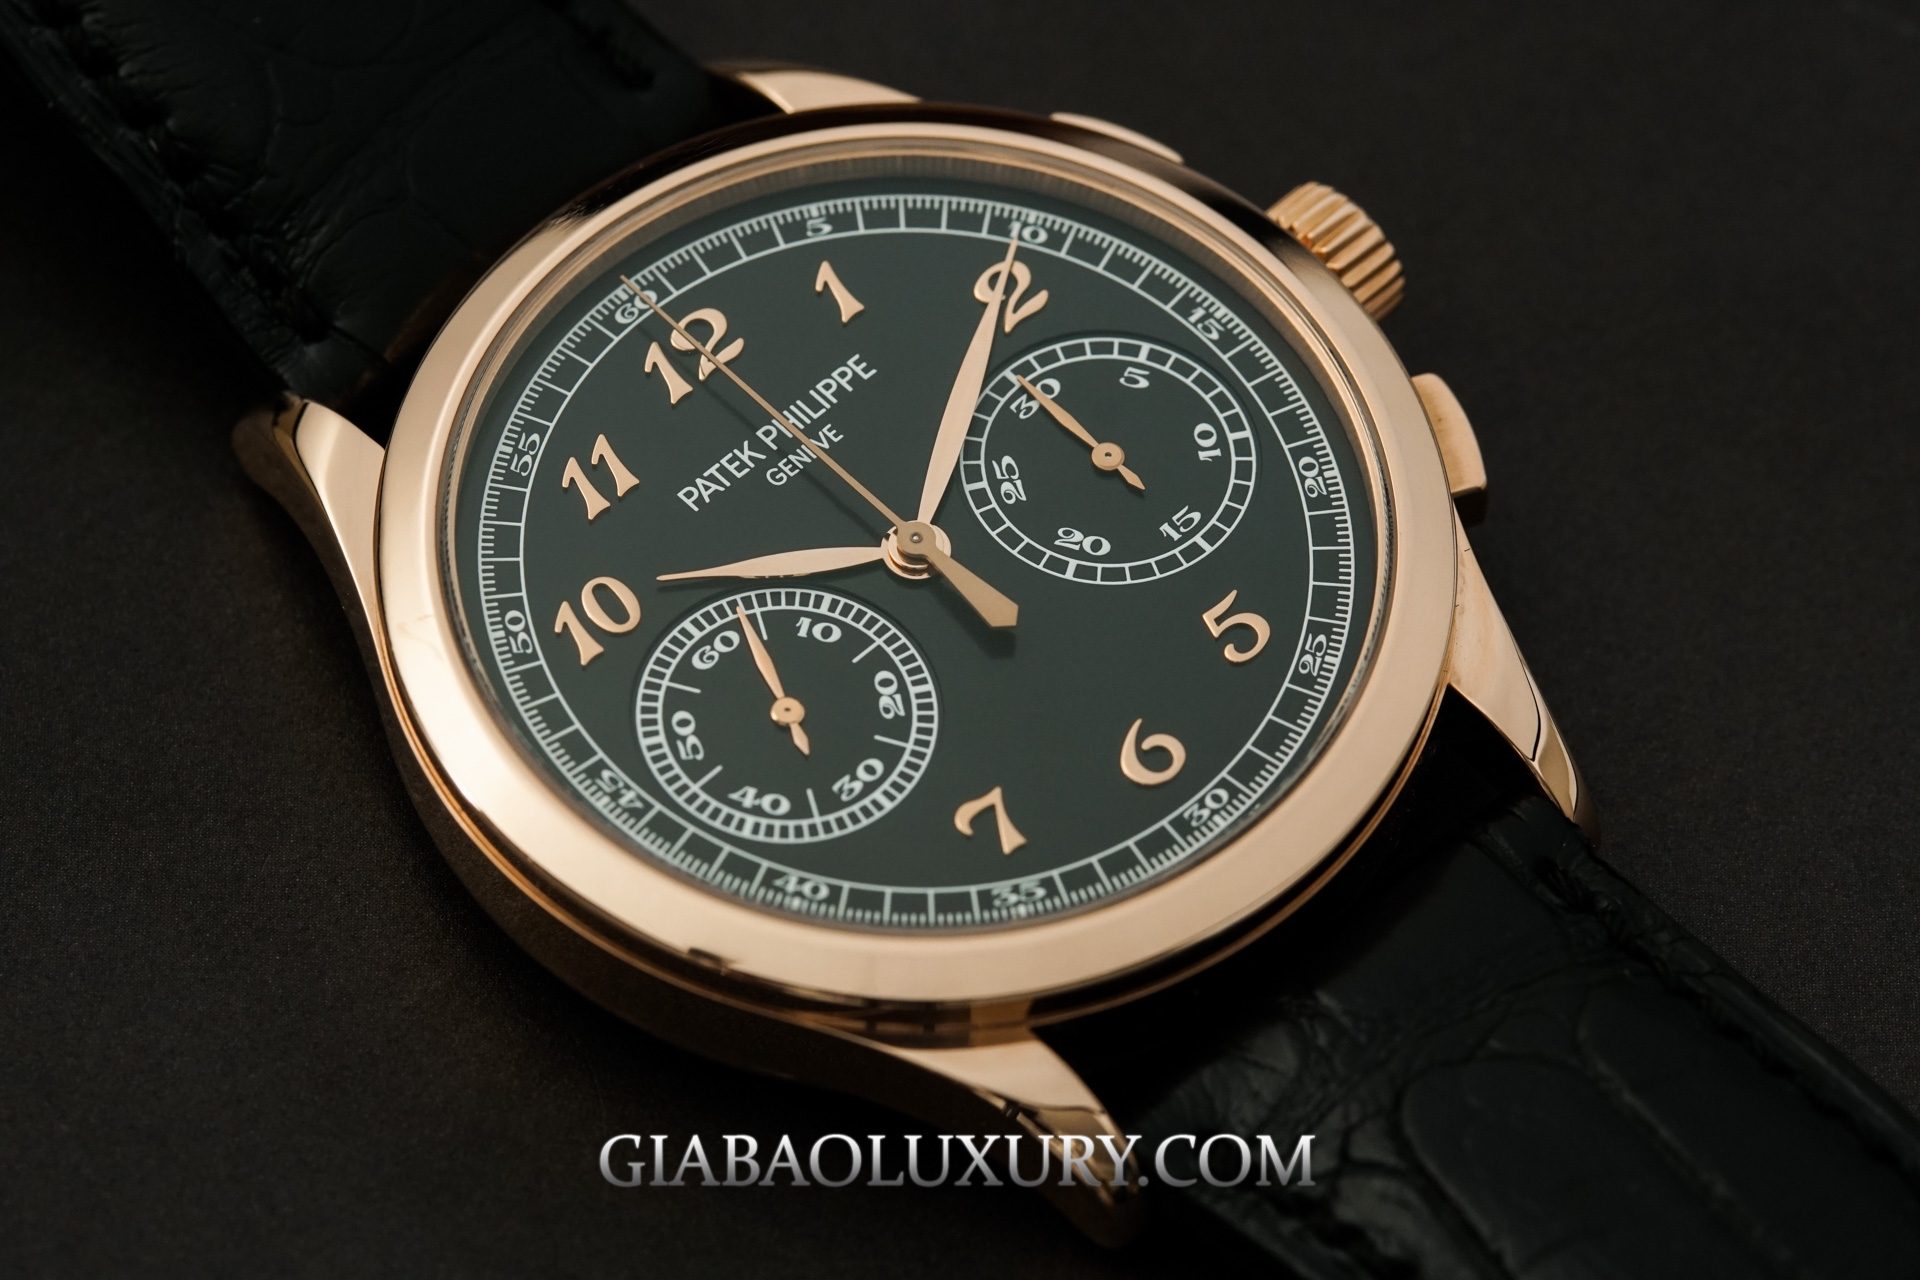 https://giabaoluxury.com/dong-ho-patek-philippe-complications-5170r-010